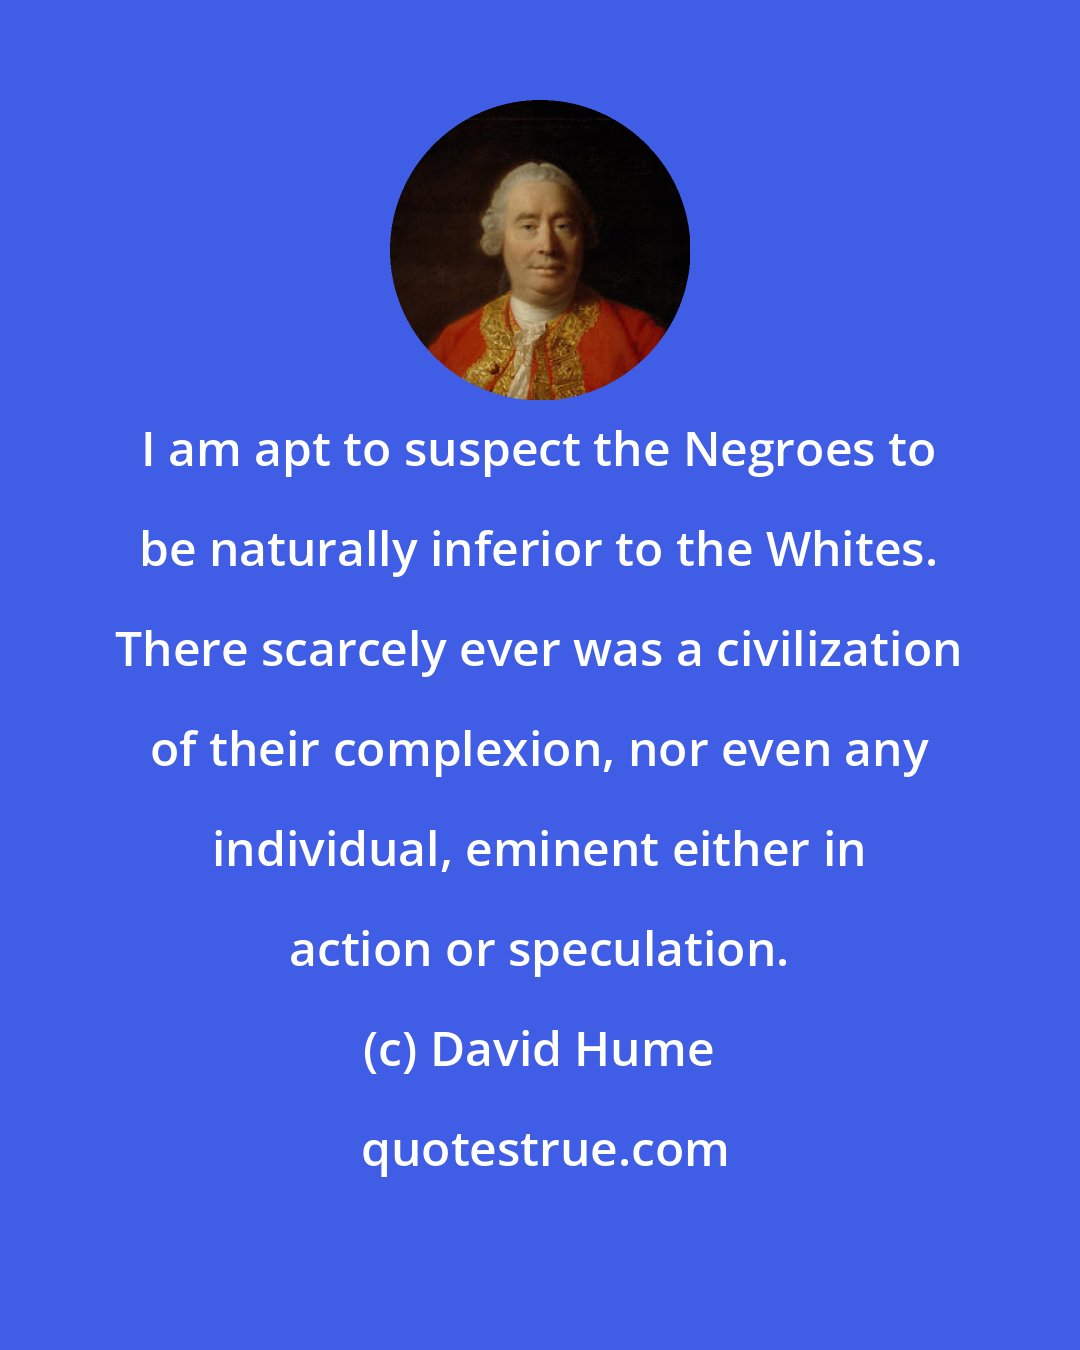 David Hume: I am apt to suspect the Negroes to be naturally inferior to the Whites. There scarcely ever was a civilization of their complexion, nor even any individual, eminent either in action or speculation.